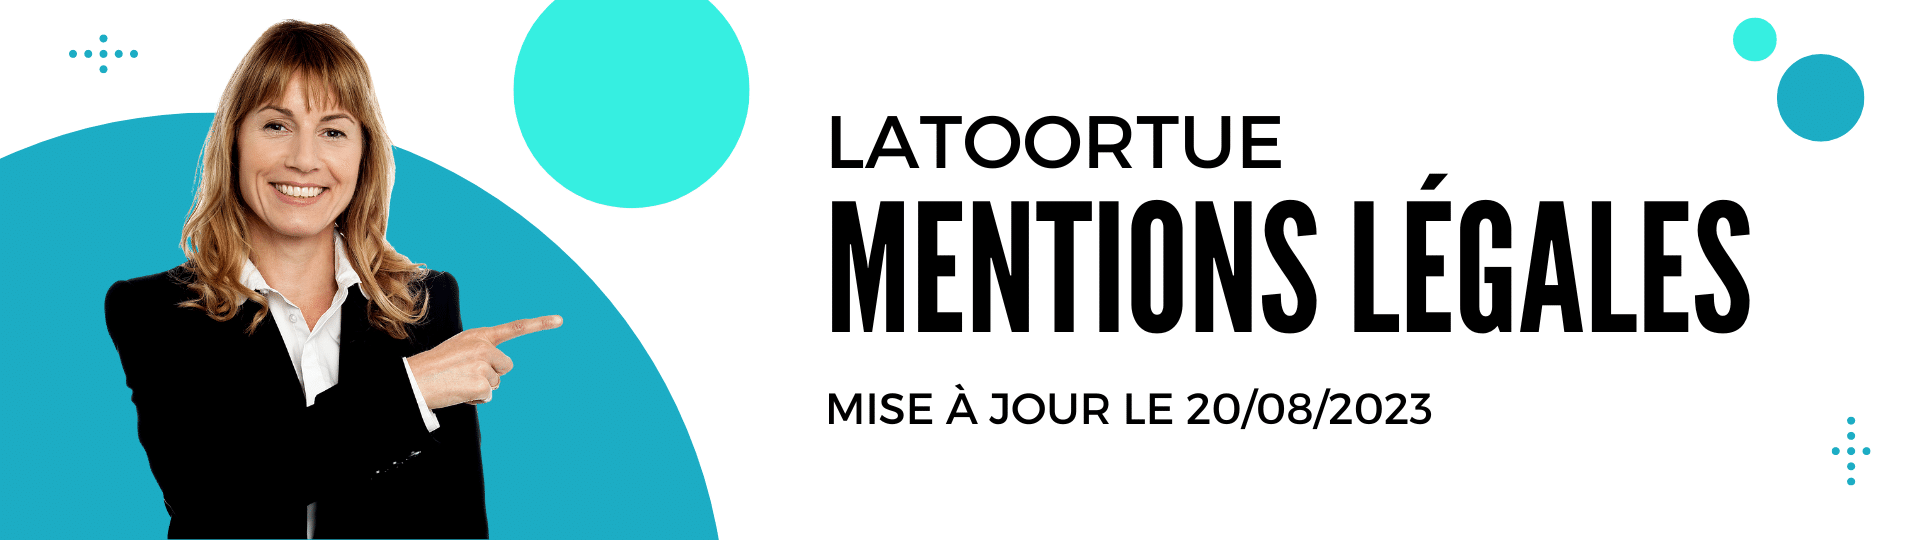 Mentions légales latoortue